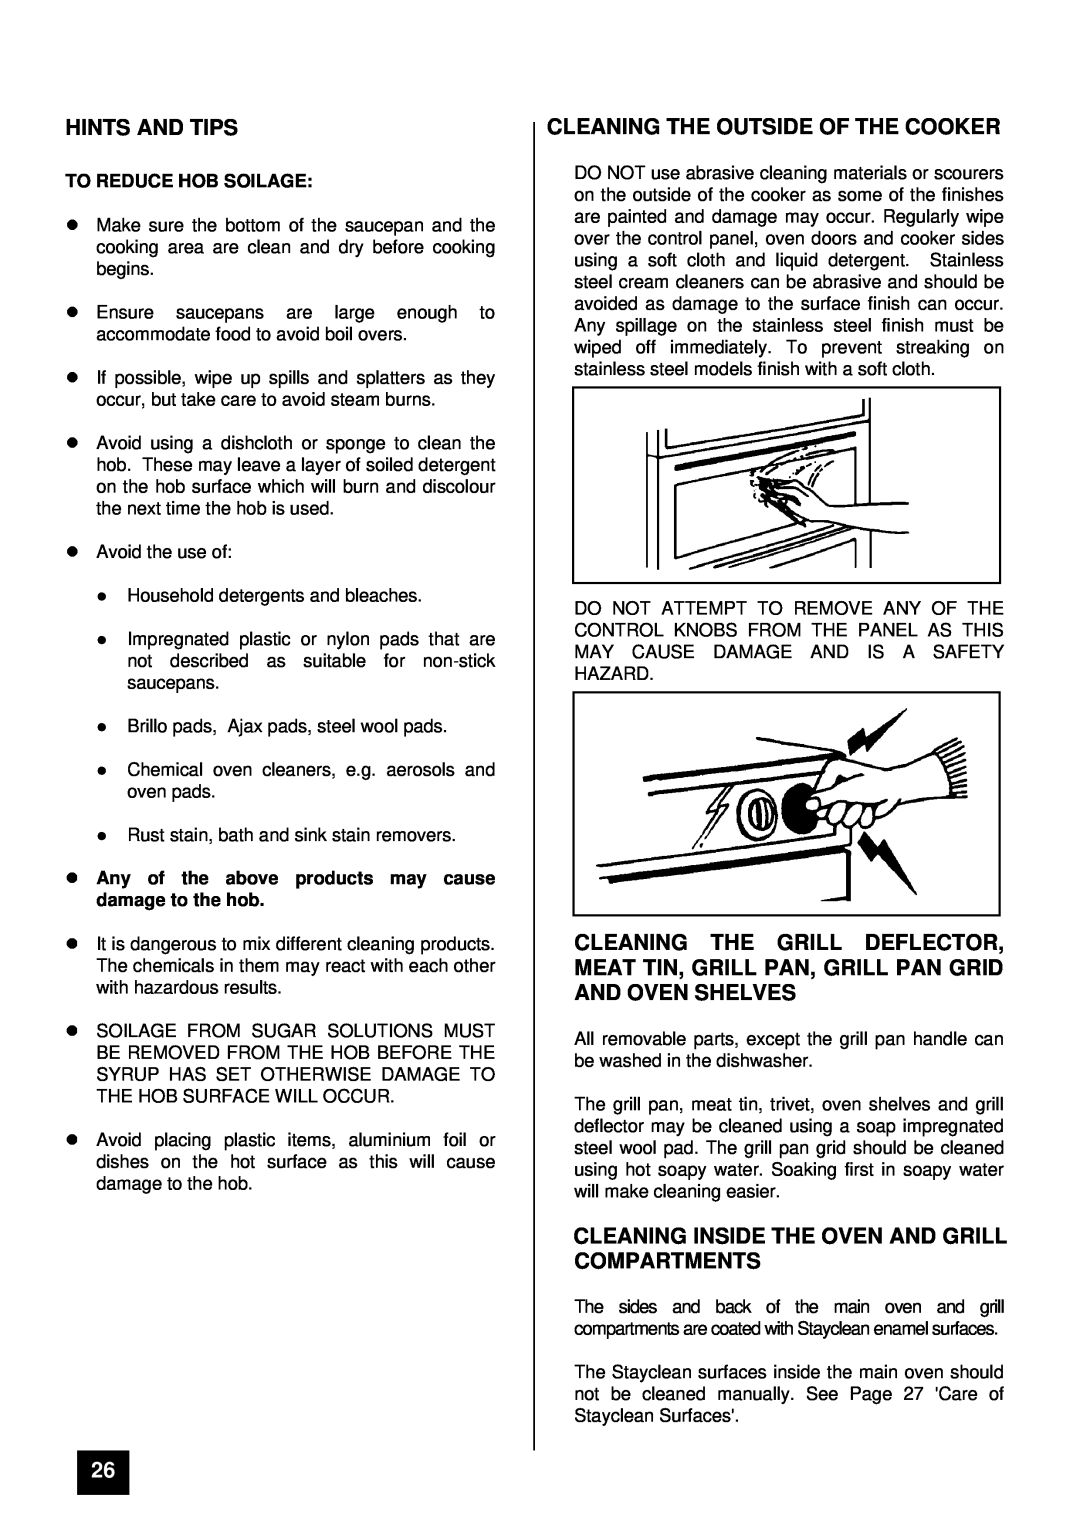 Zanussi ZCE ID manual Cleaning The Outside Of The Cooker, Cleaning Inside The Oven And Grill Compartments, Hints And Tips 